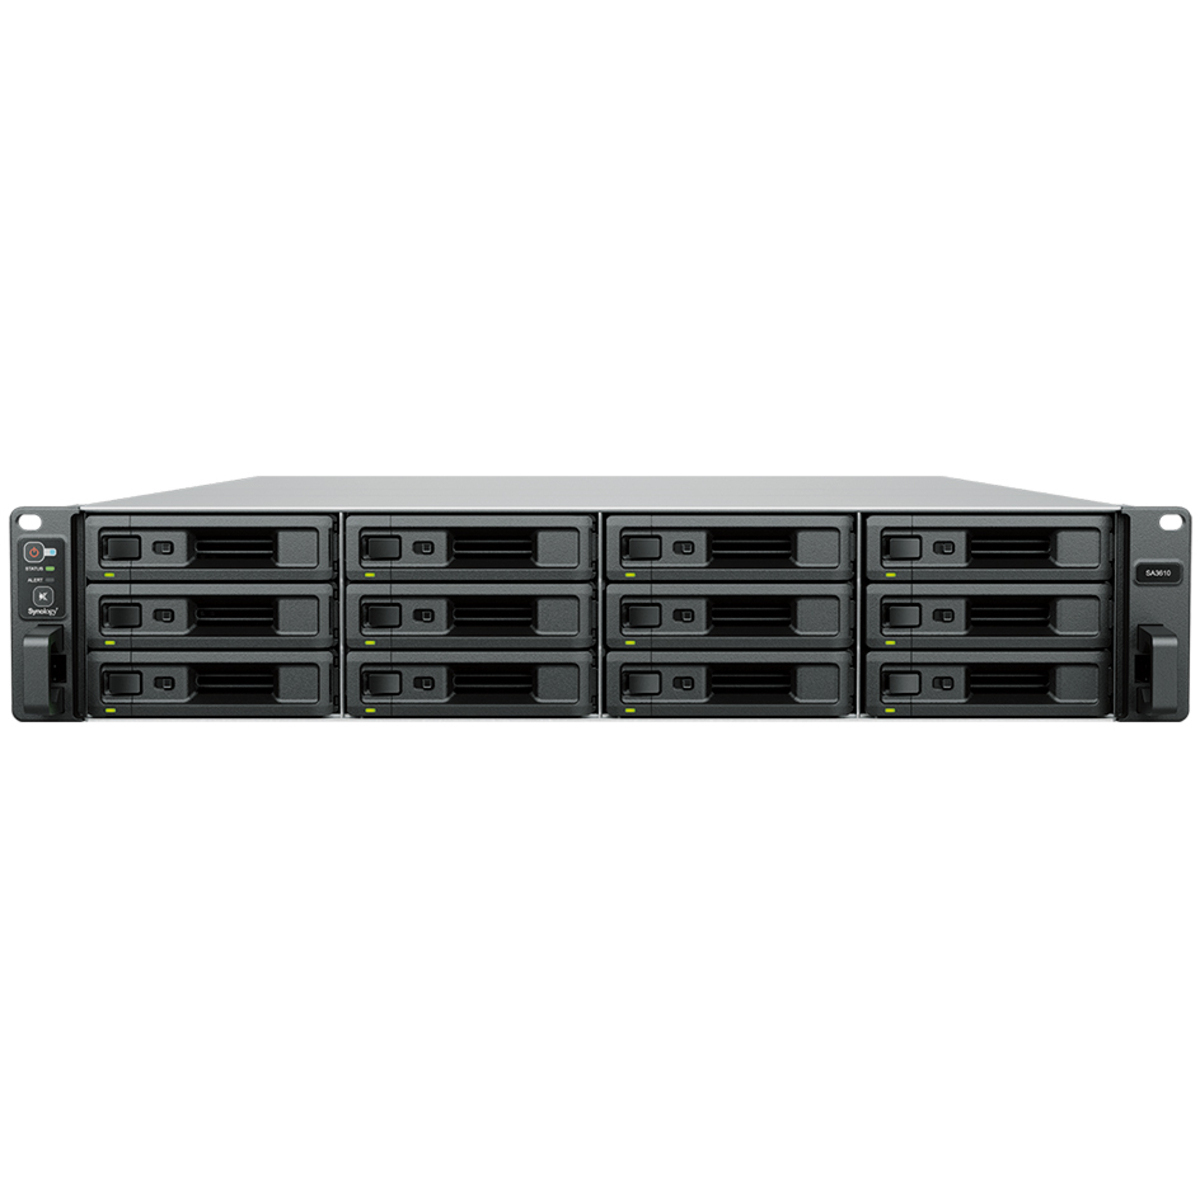 Synology RackStation SA3610 80tb 12-Bay RackMount Large Business / Enterprise NAS - Network Attached Storage Device 10x8tb Western Digital Red Pro WD8003FFBX 3.5 7200rpm SATA 6Gb/s HDD NAS Class Drives Installed - Burn-In Tested RackStation SA3610